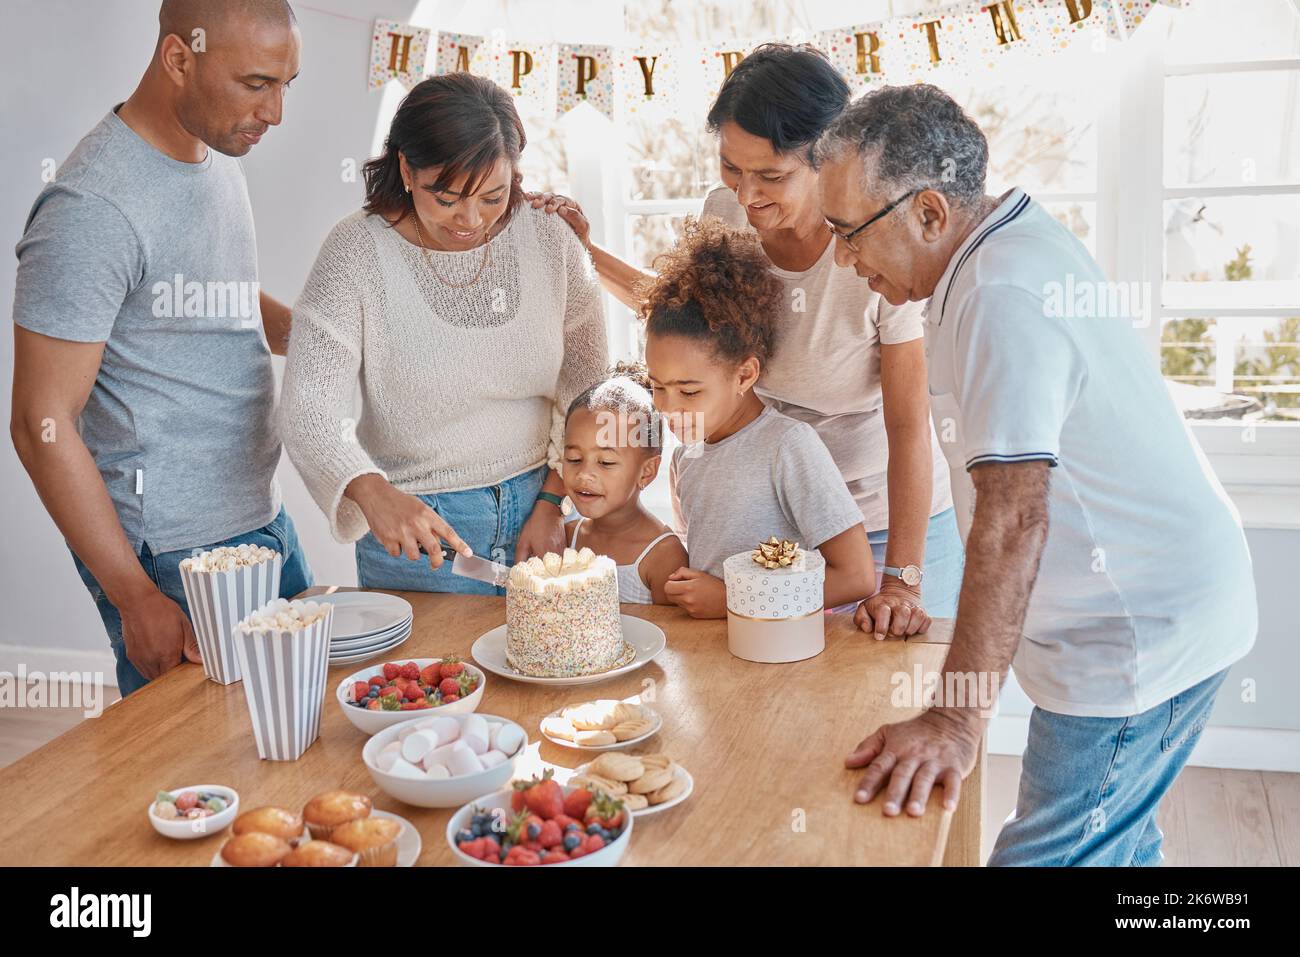 Count your age by friends, not years. a family cutting a cake and celebrating a birthday party at home. Stock Photo